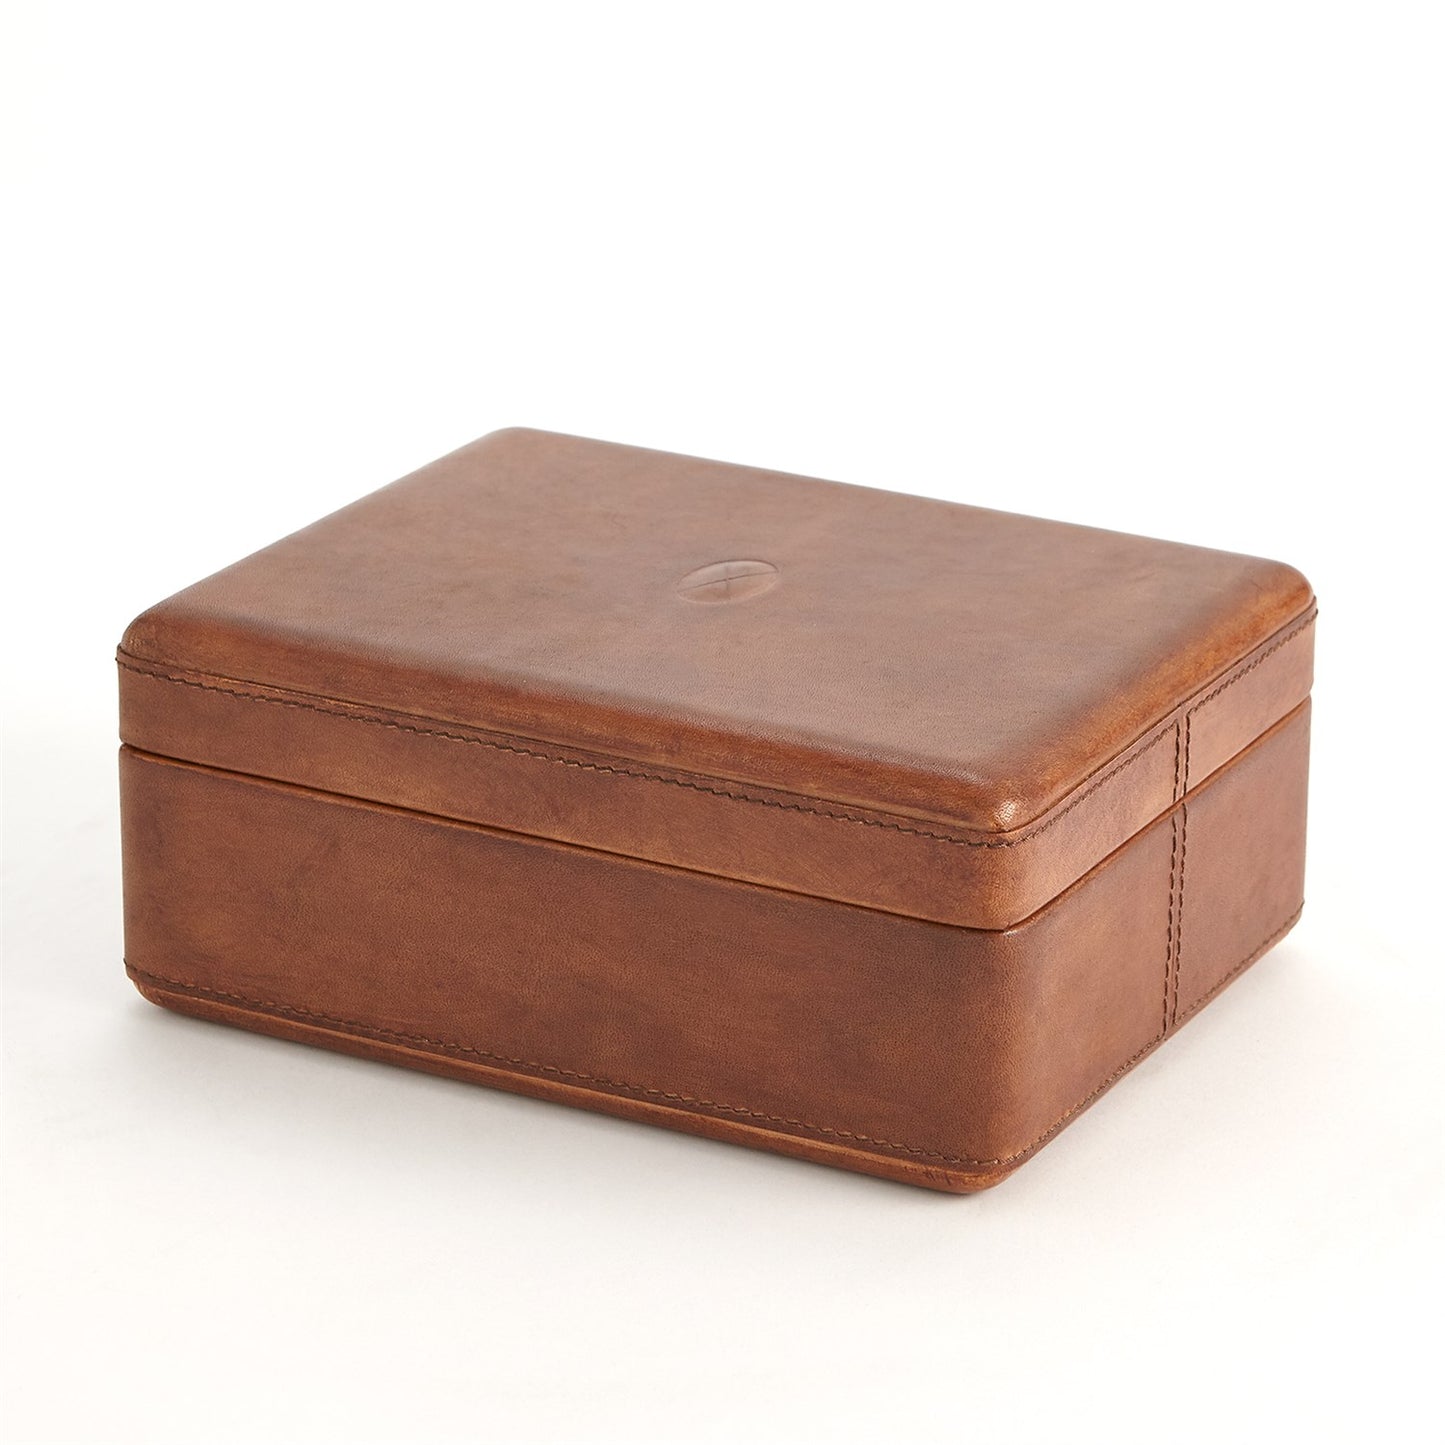 Signature Tobacco Covered Boxes